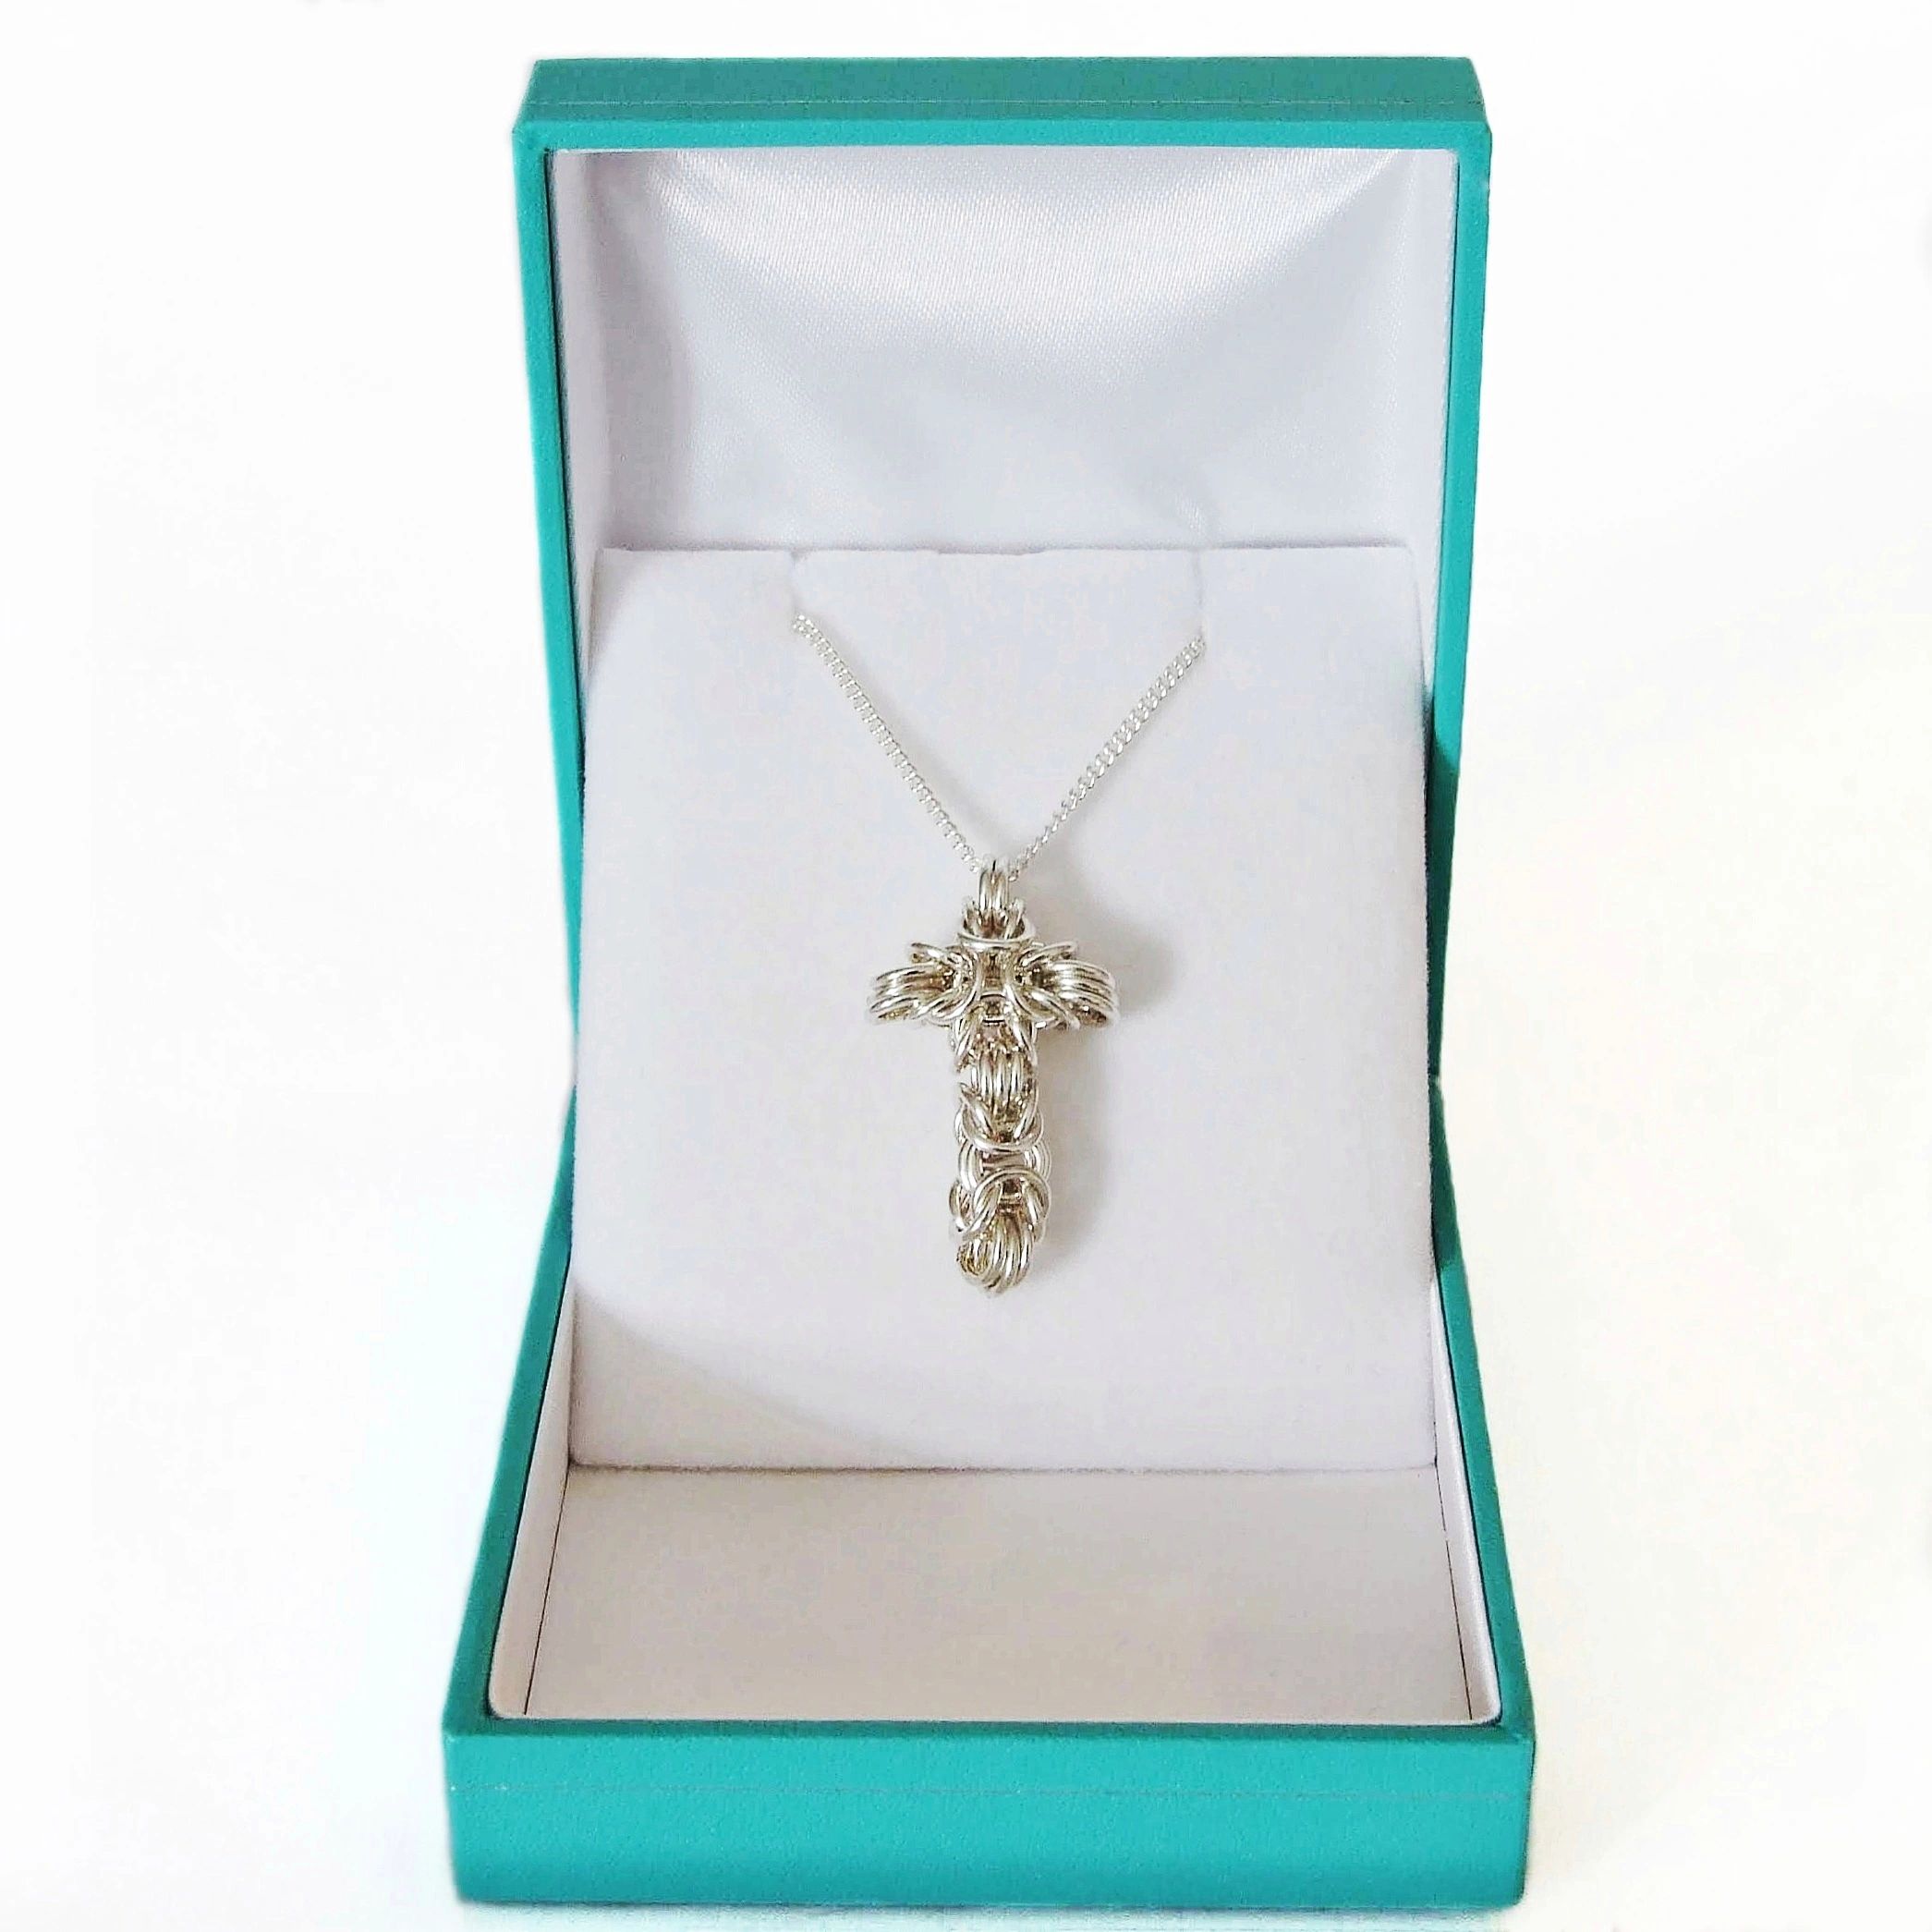 Cross pendant handmade Celtic chainmaille byzantine silver fill sterling silver chain clasp gift box